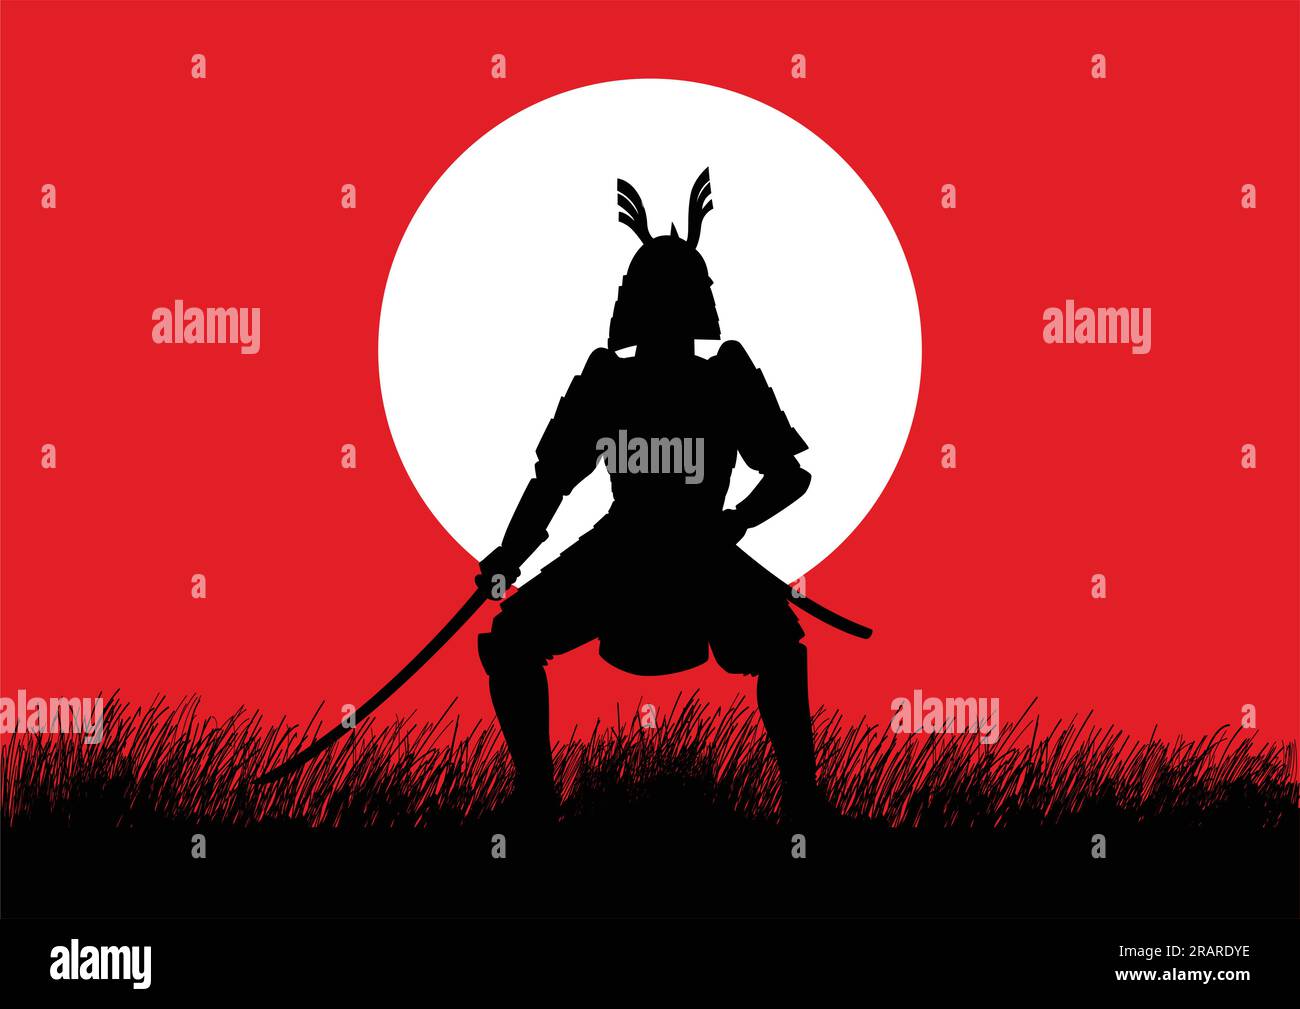 Silhouette illustration of a Samurai with graphic sun symbol as the background Stock Vector